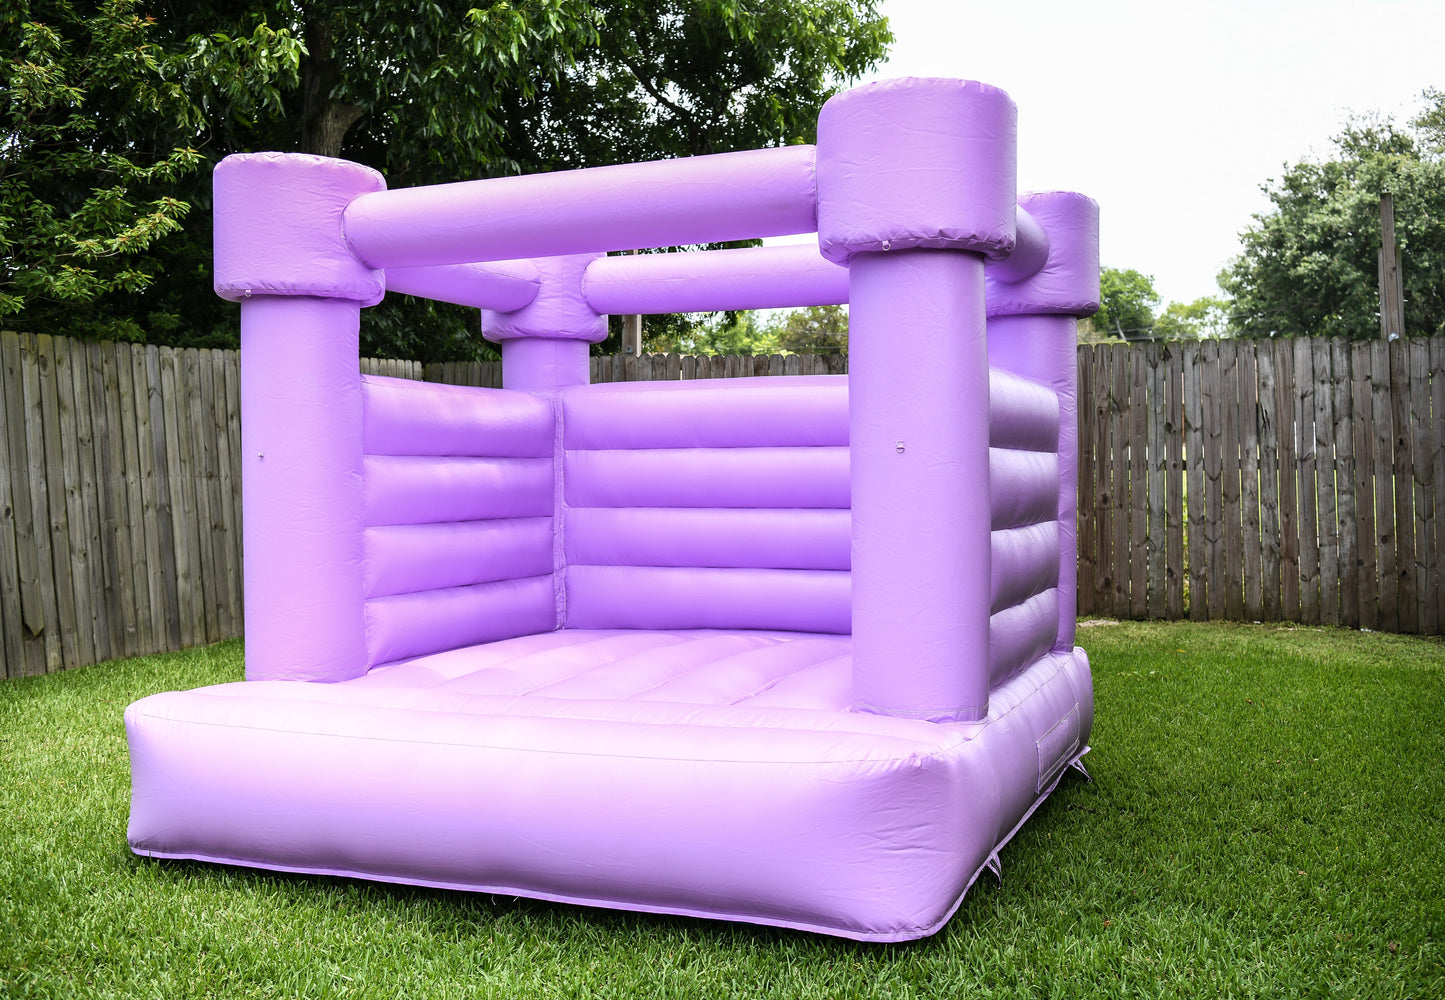 Tots Bounce House